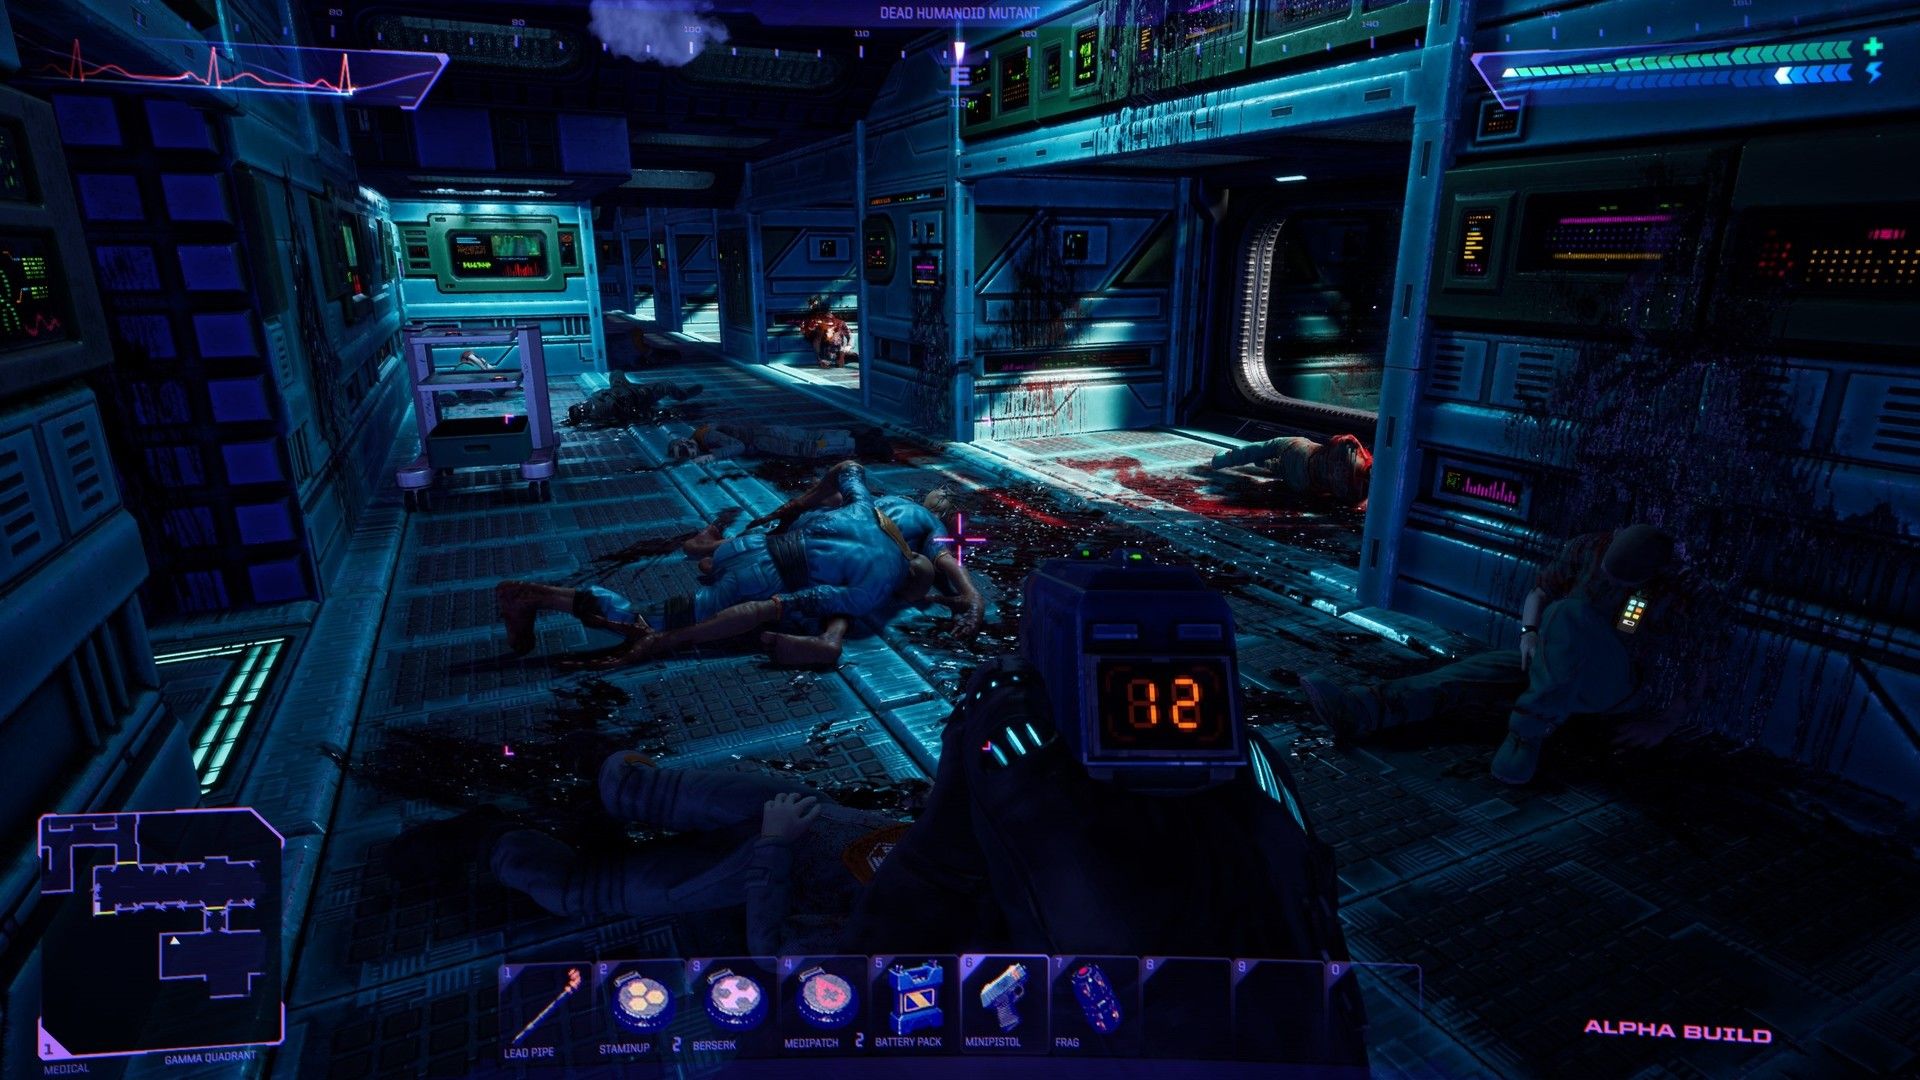 A third-person shooter image of a blue-colored lab room